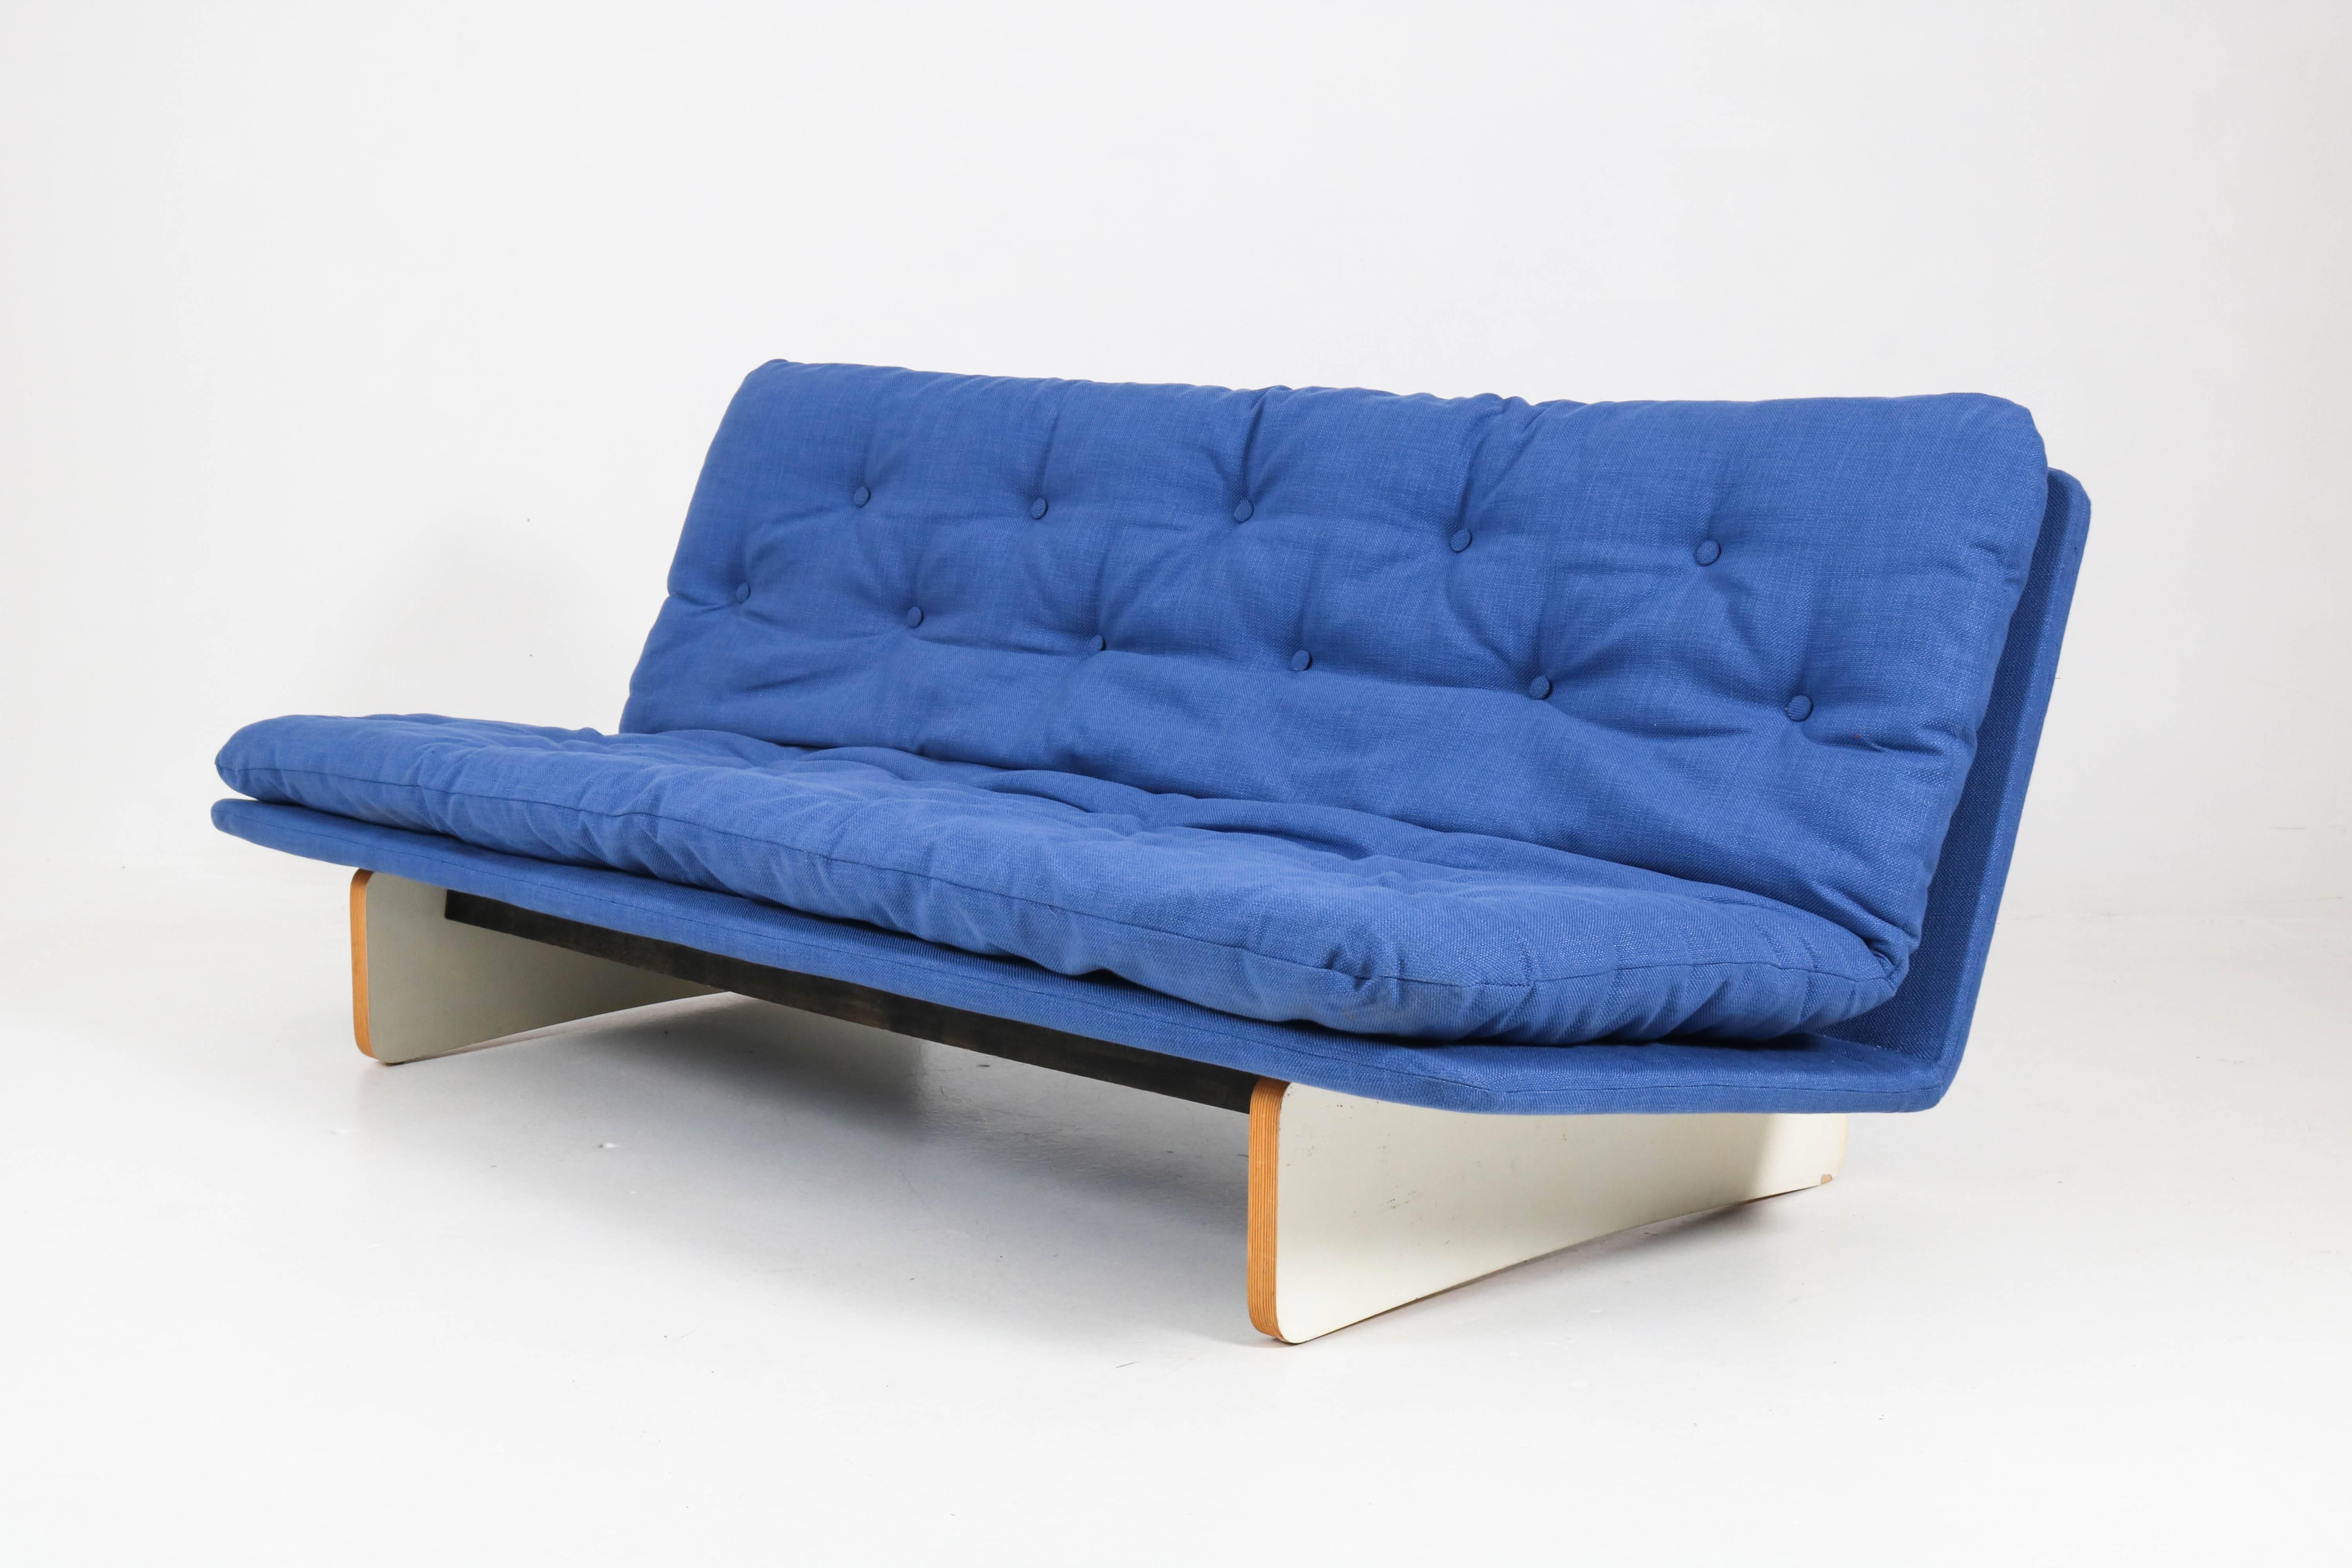 Laminated Dutch Mid-Century Modern Sofa 671 by Kho Liang Le for Artifort, 1960s